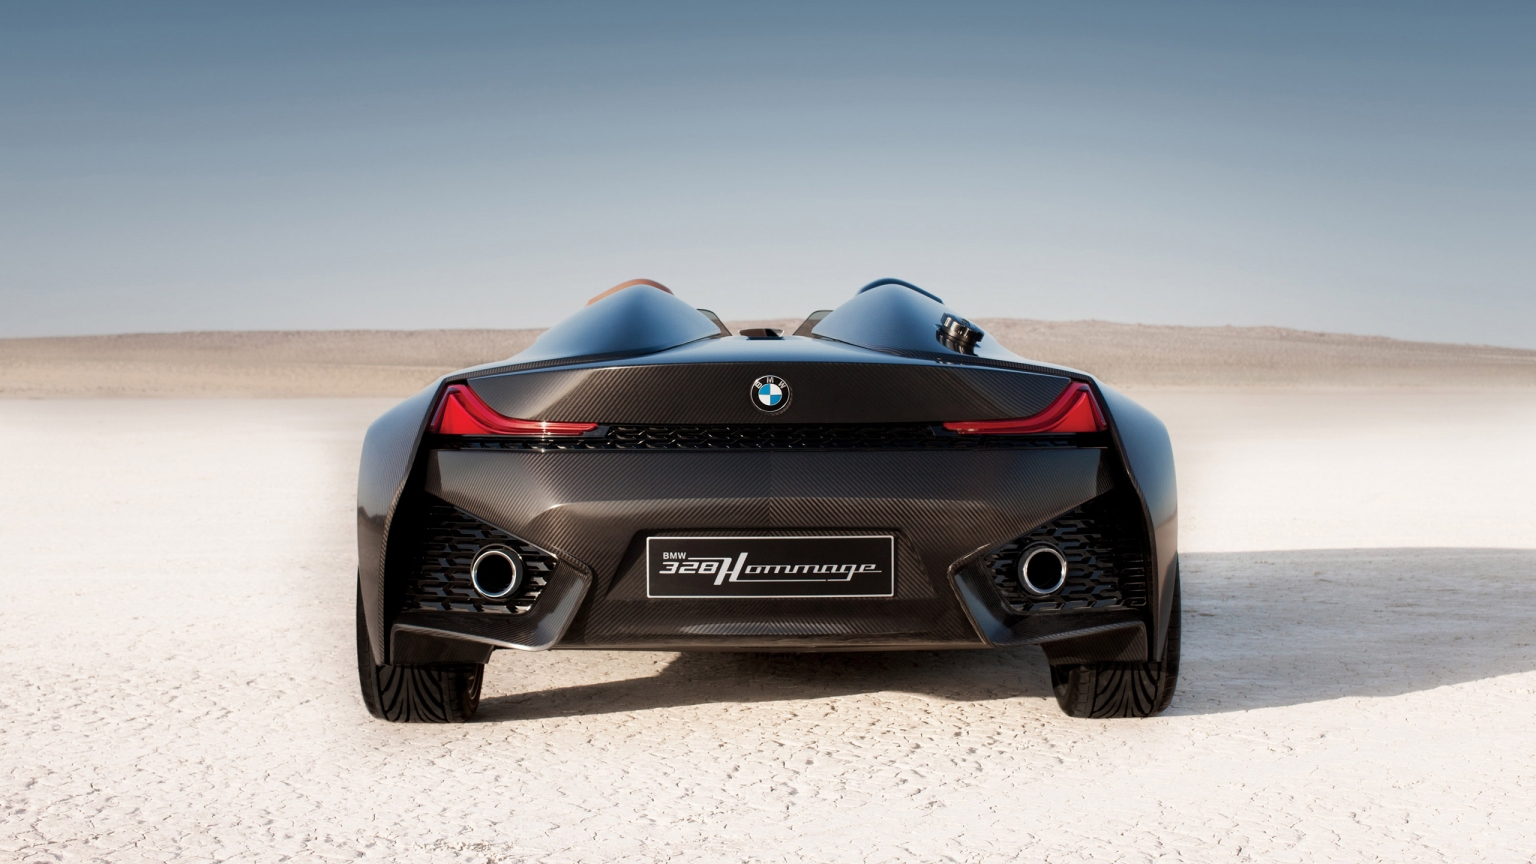 BMW 328 Hommage Rear for 1536 x 864 HDTV resolution